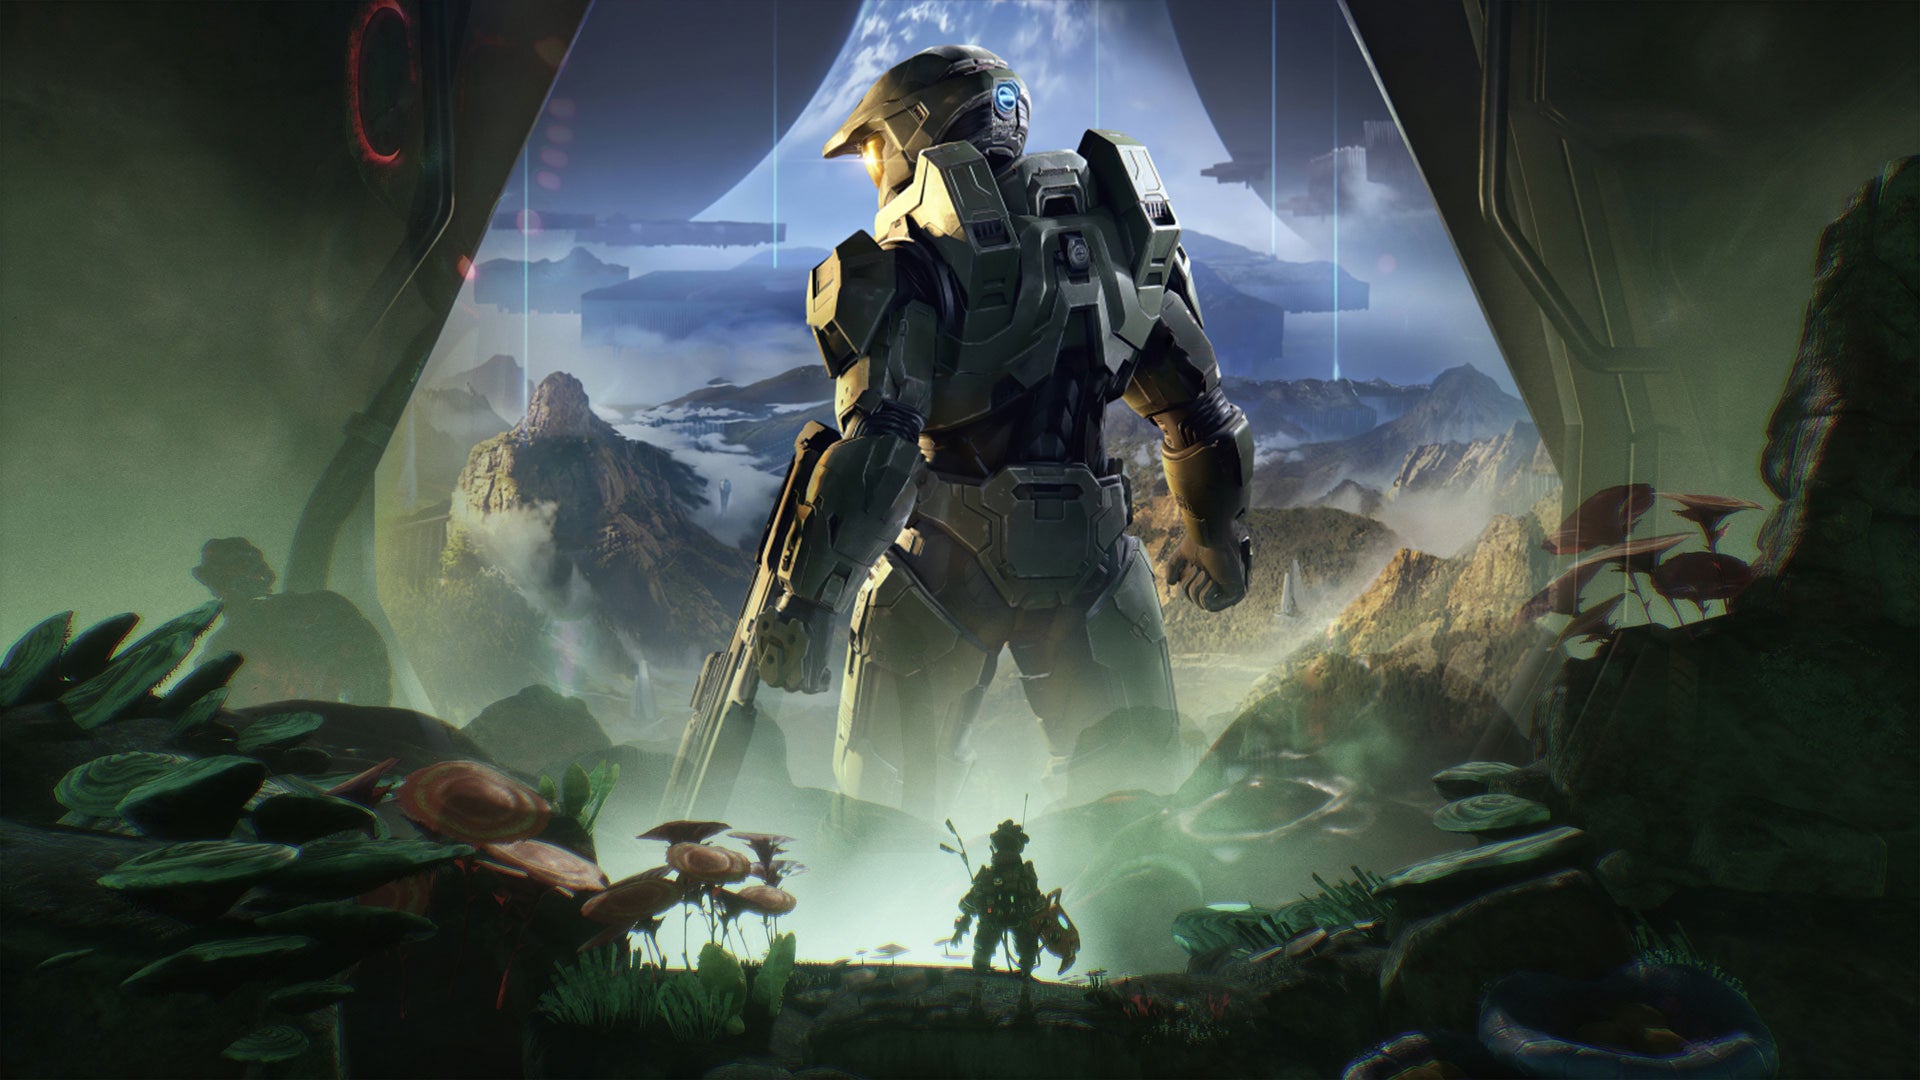 Image for Top 7 games releasing in December - Halo Infinite, Solar Ash, and more